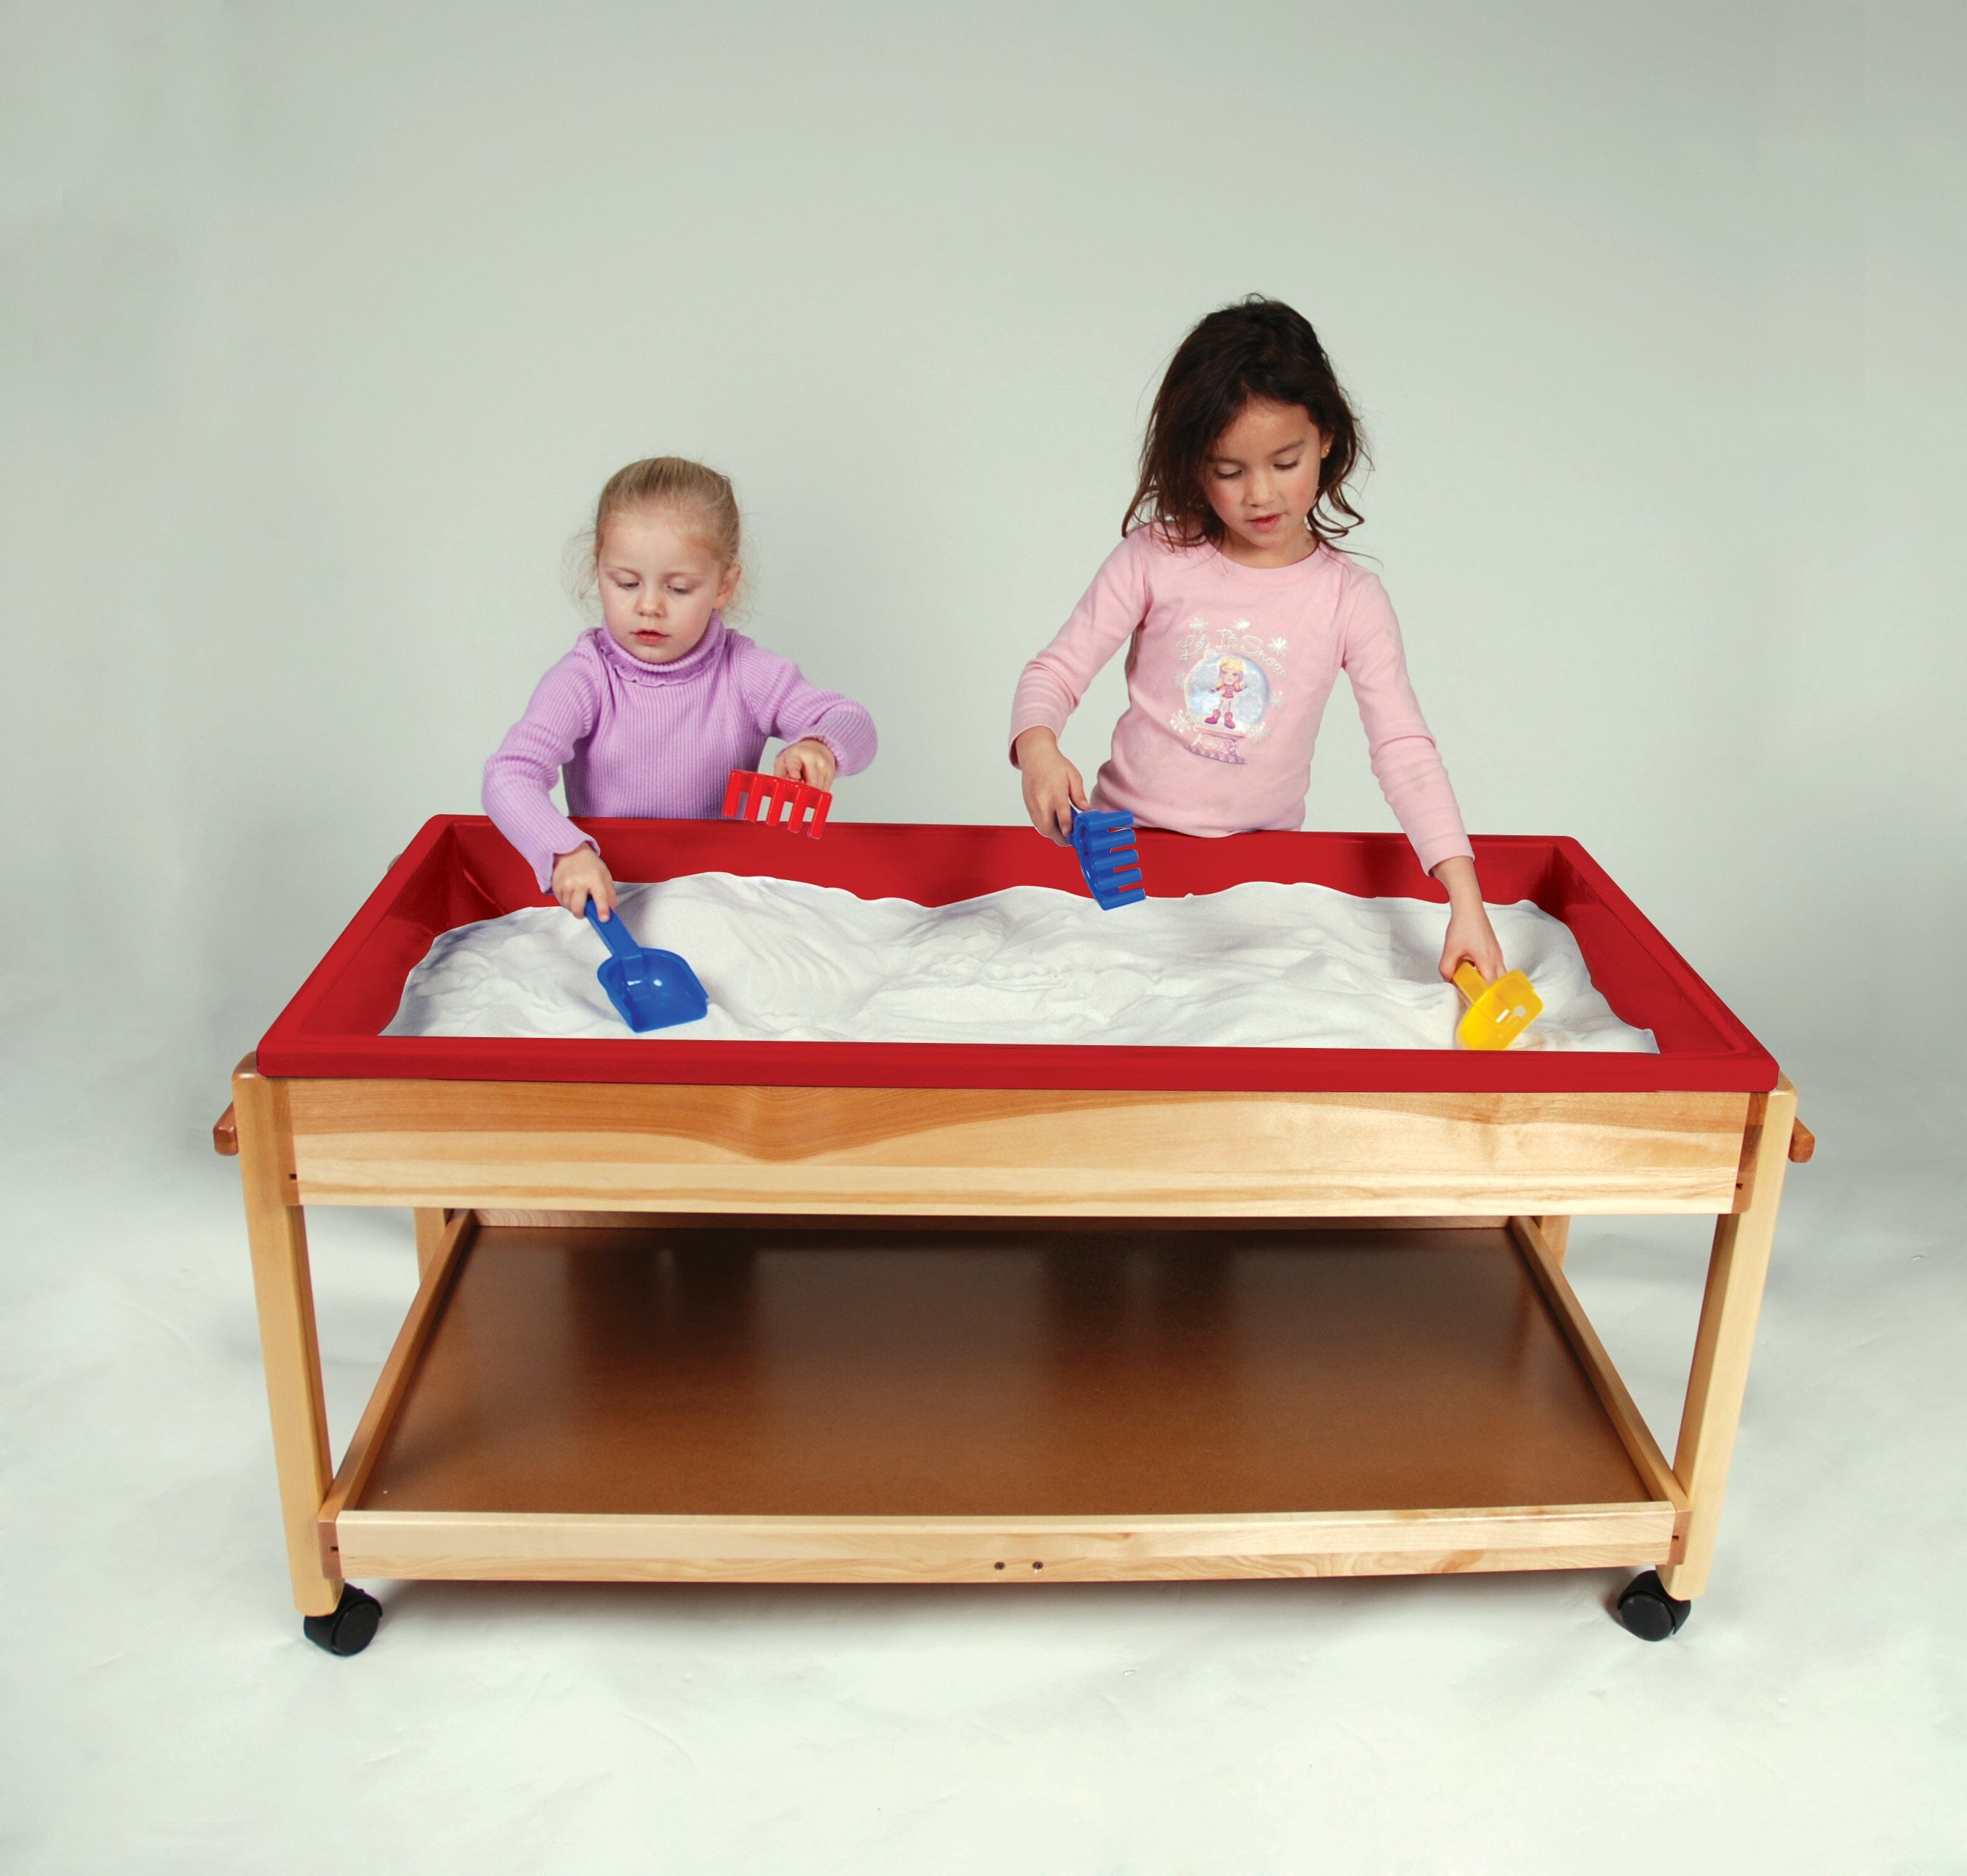 Sand and Water Play Table - louisekool